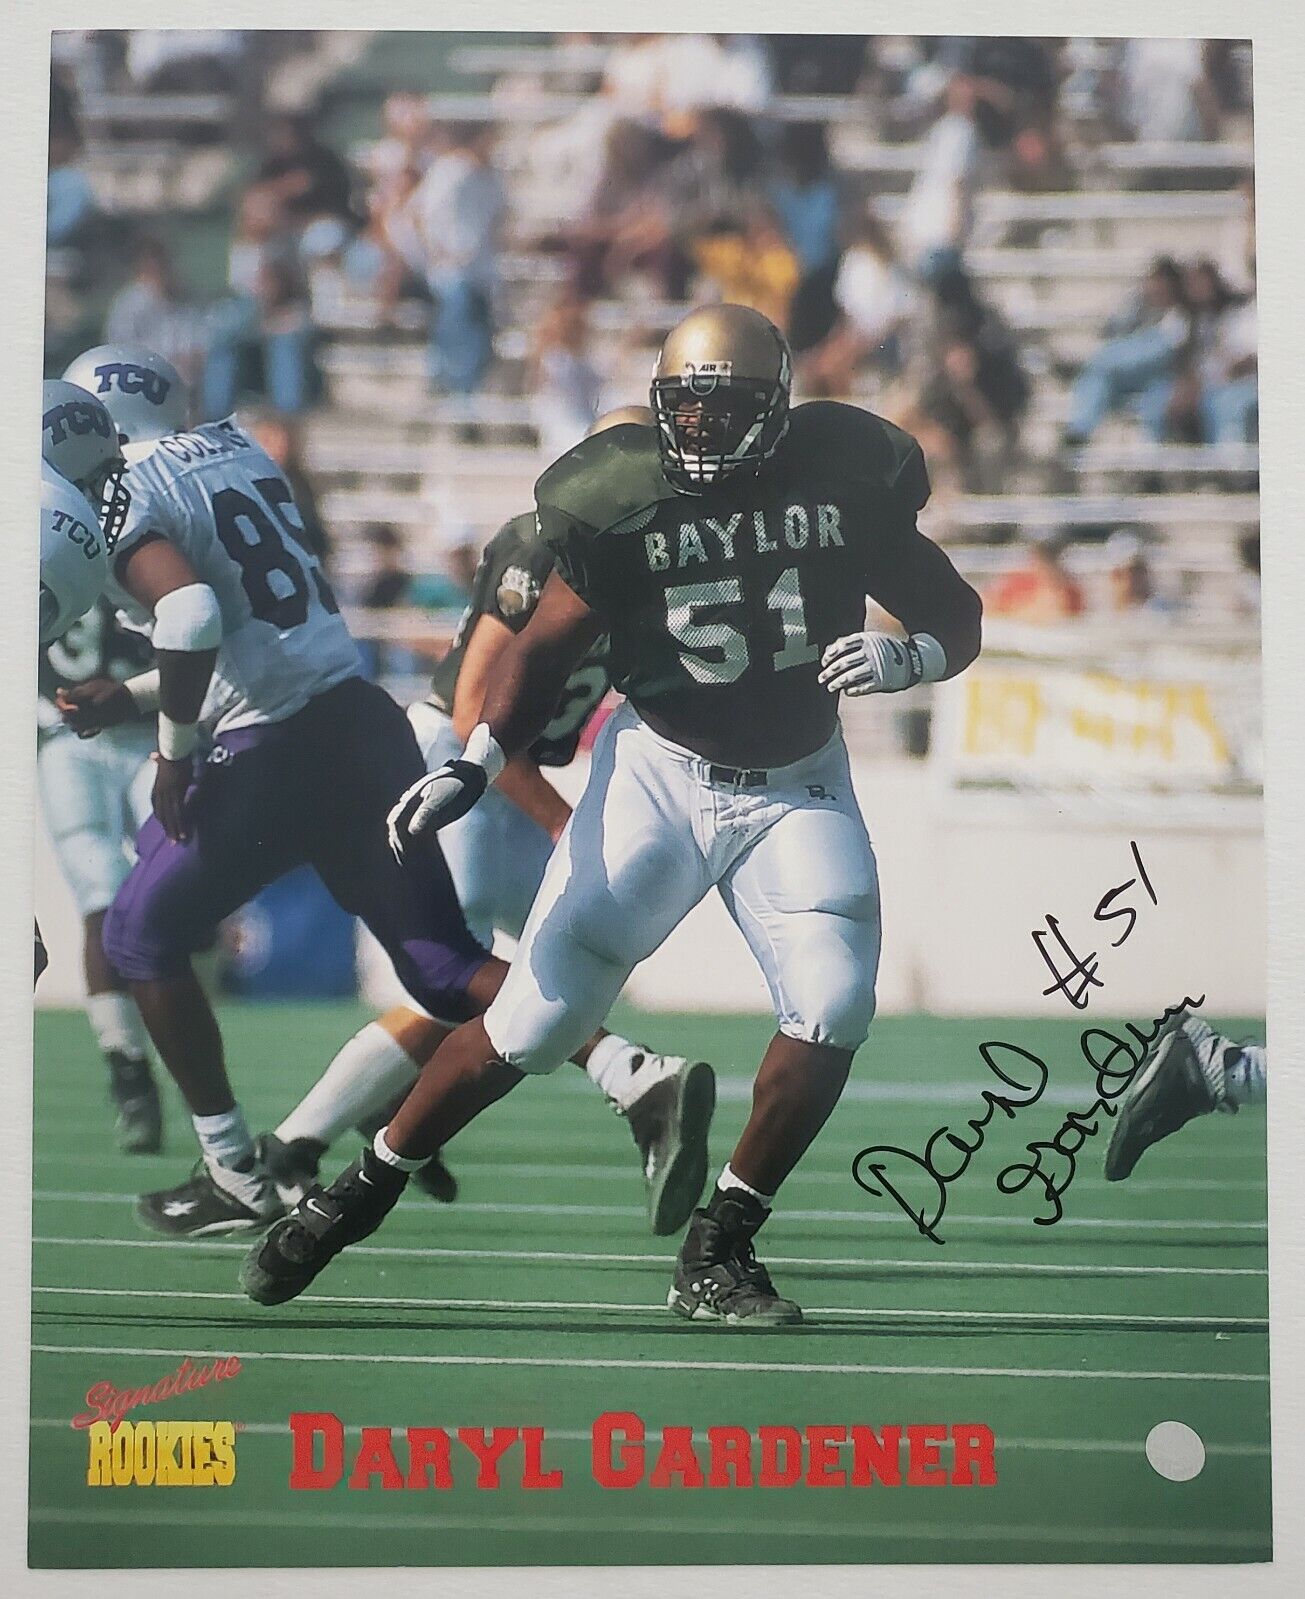 Daryl Gardener Signed Signature Rookies 8x10 Photo Poster painting College Baylor NFL RAD